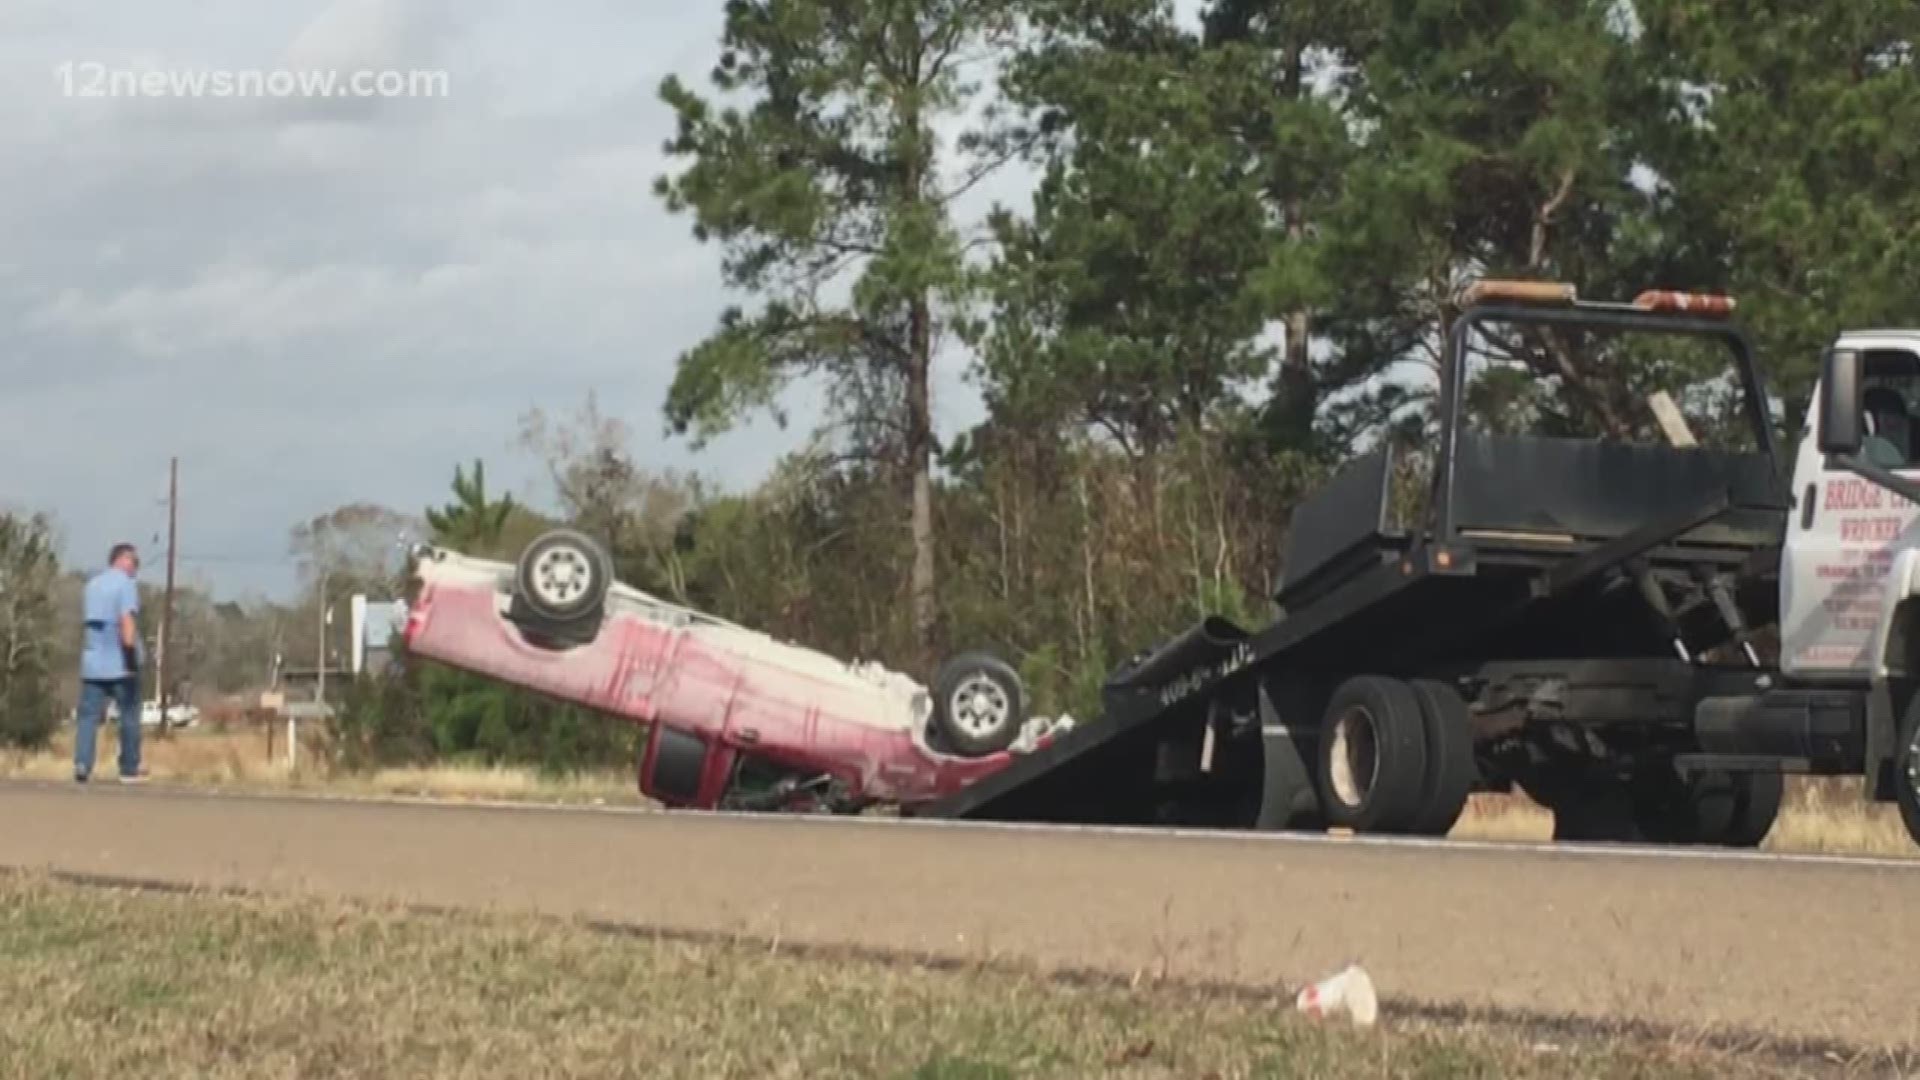 Bridge City Police are investigating a wreck that occurred at 9:42 a.m. Friday south of Bessie Heights. Police said there was a fatal roll over wreck on FM 1442.